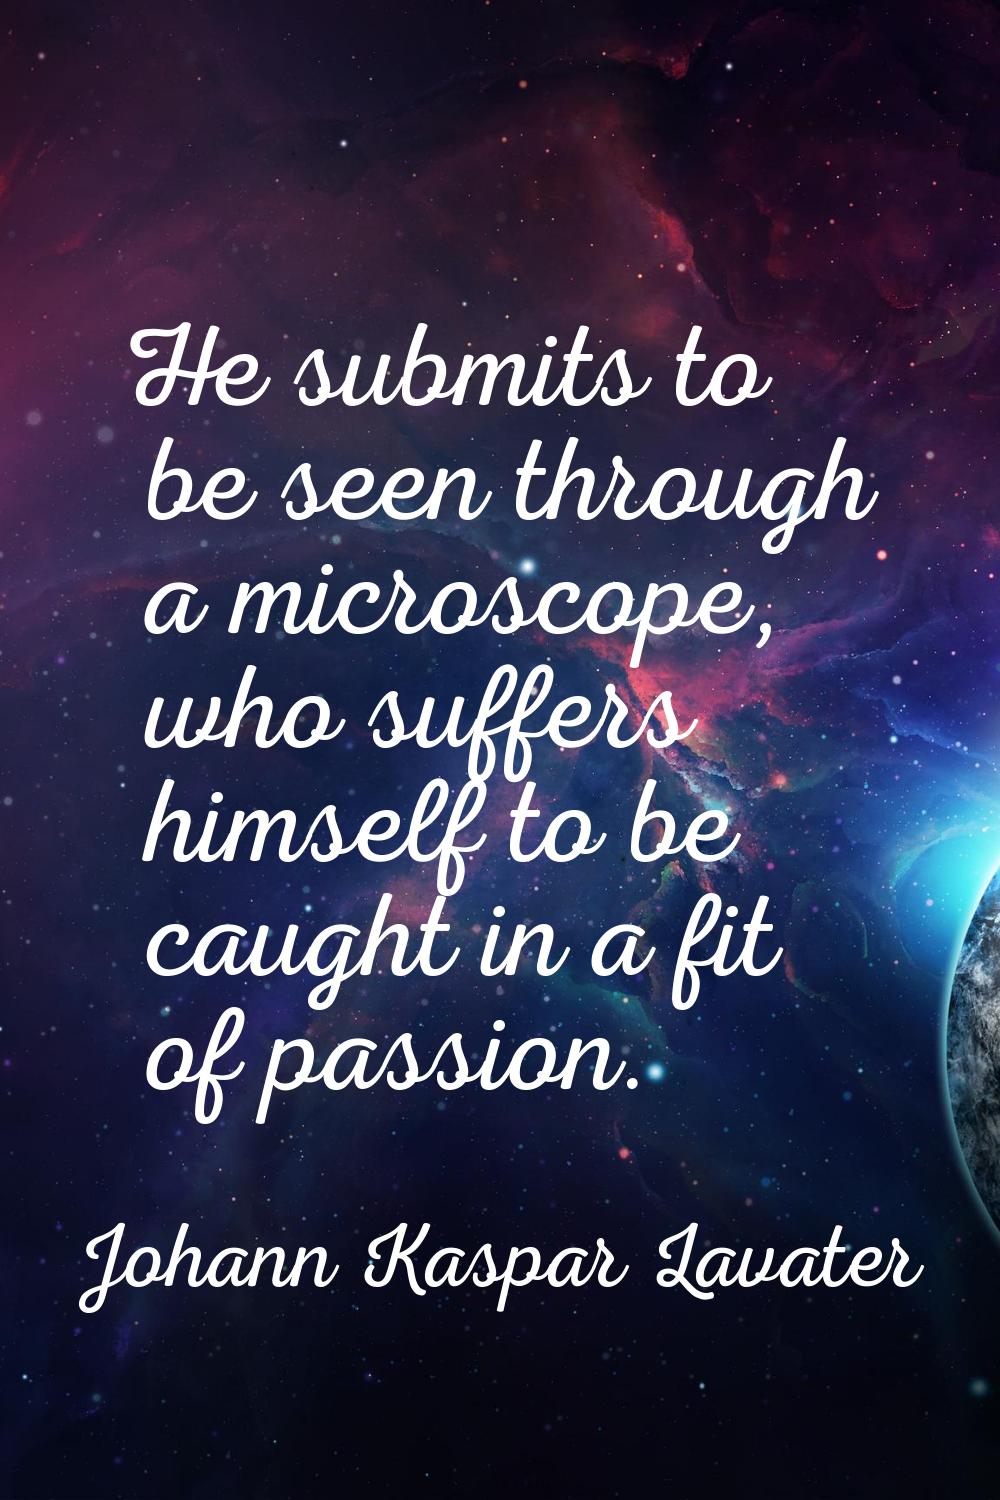 He submits to be seen through a microscope, who suffers himself to be caught in a fit of passion.